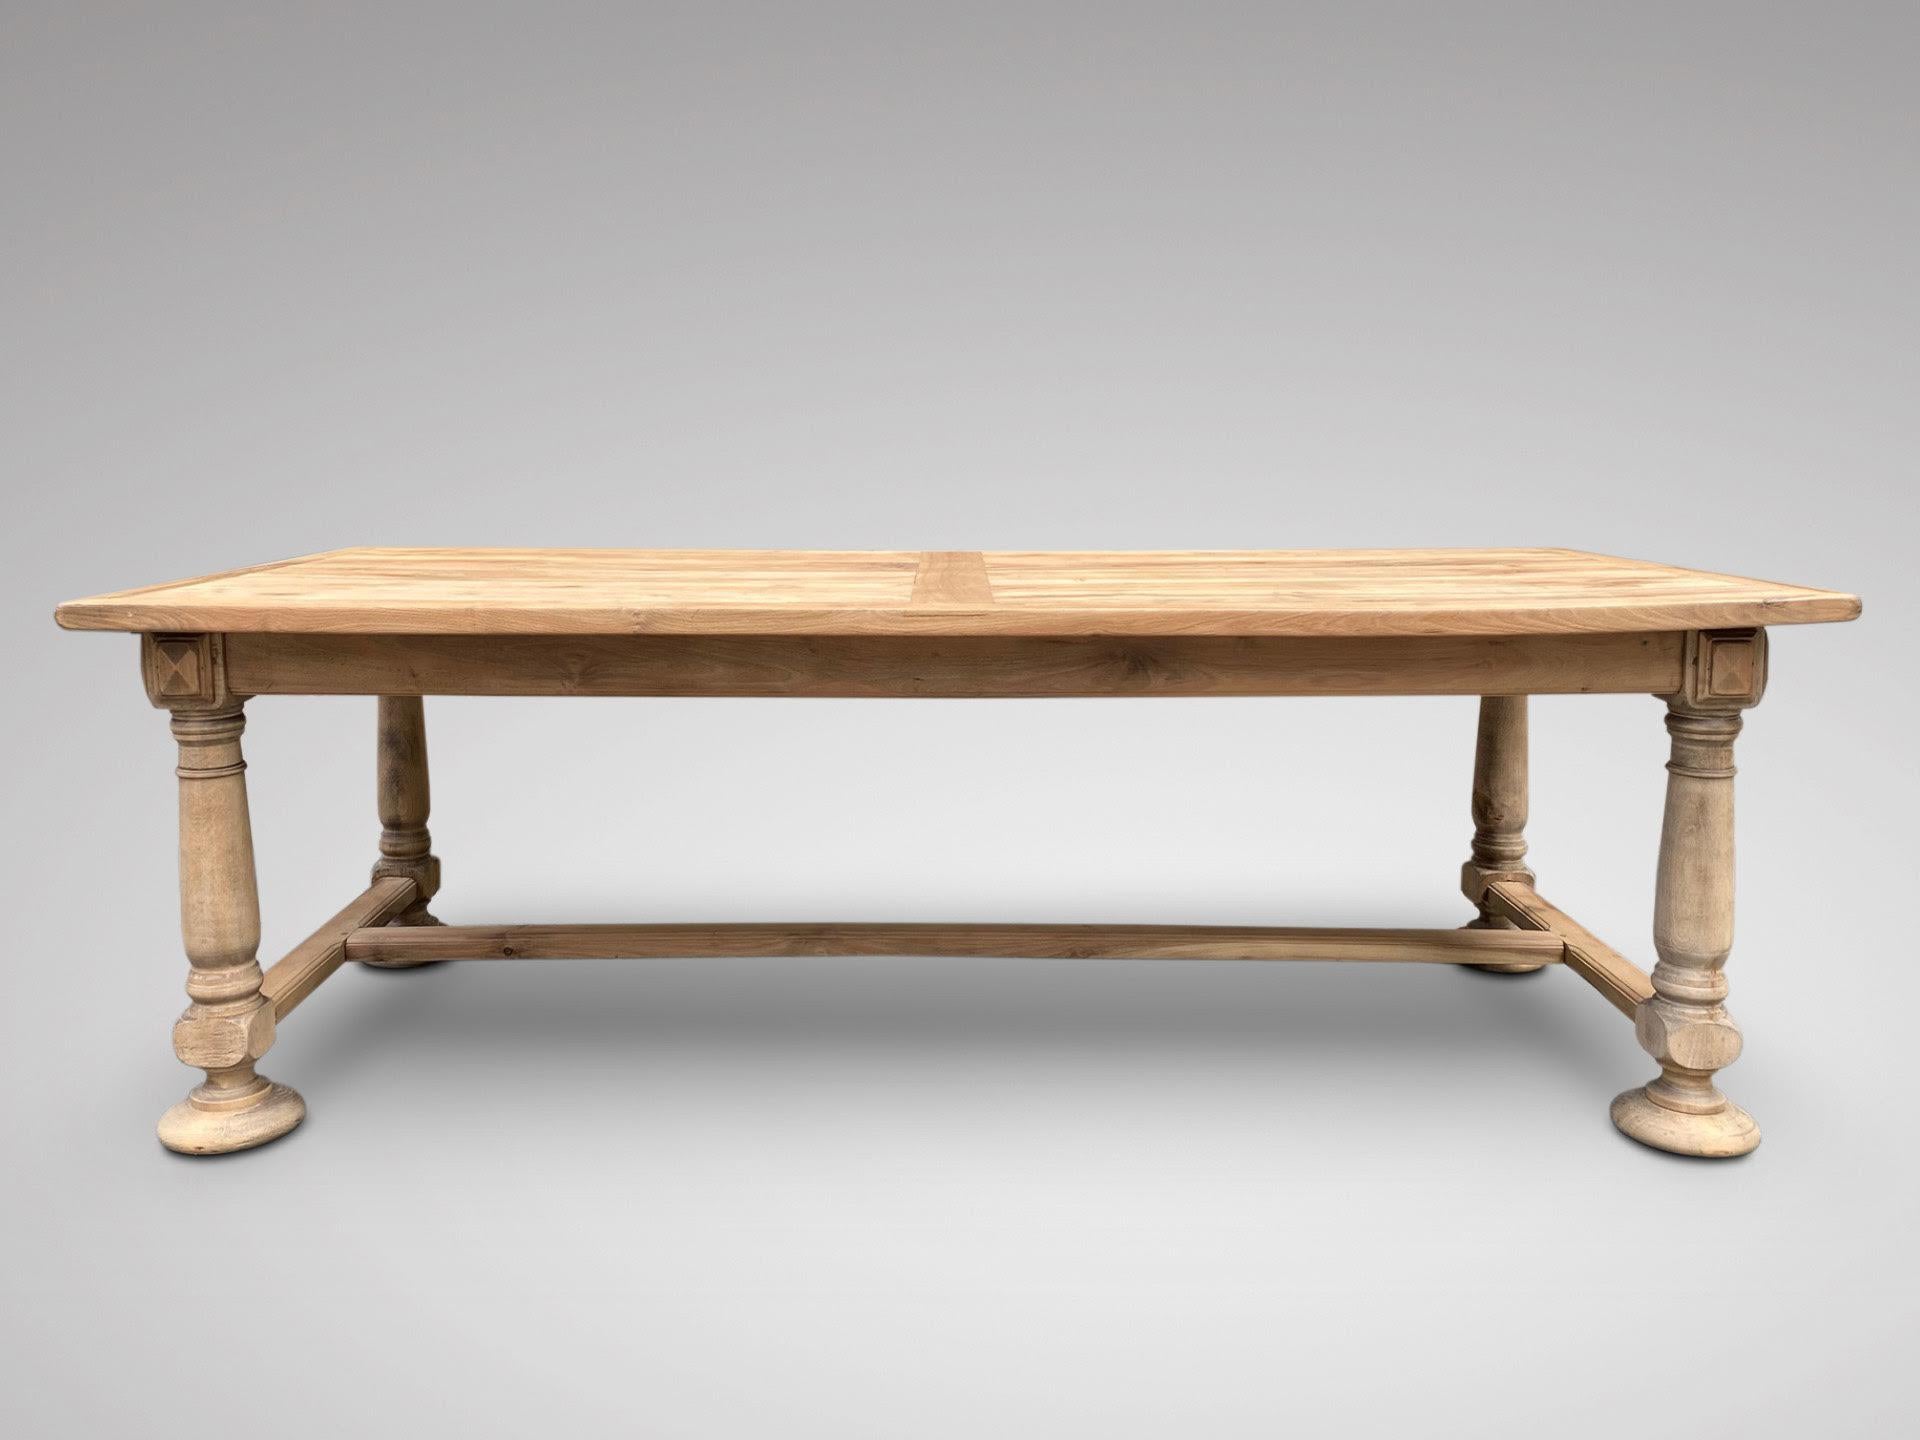 A late 19th century French large bleached walnut refectory farmhouse dining table, with extensions to each end, greatly increasing the size overall, standing on four turned tapering legs and ending on bun feet, united by stretchers. Superb quality